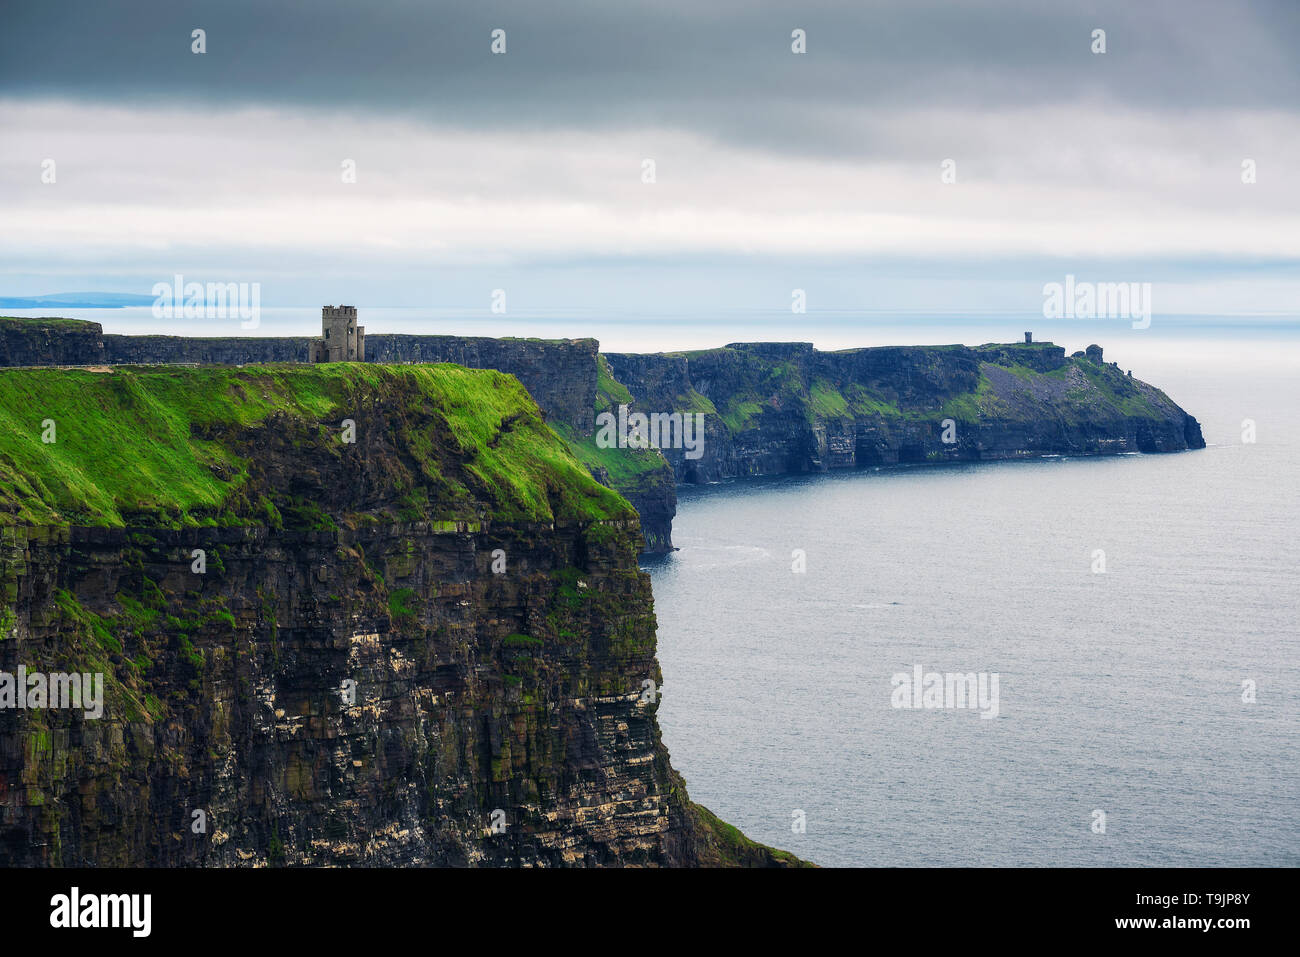 Stone observation tower at Cliffs of Moher in Ireland Stock Photo